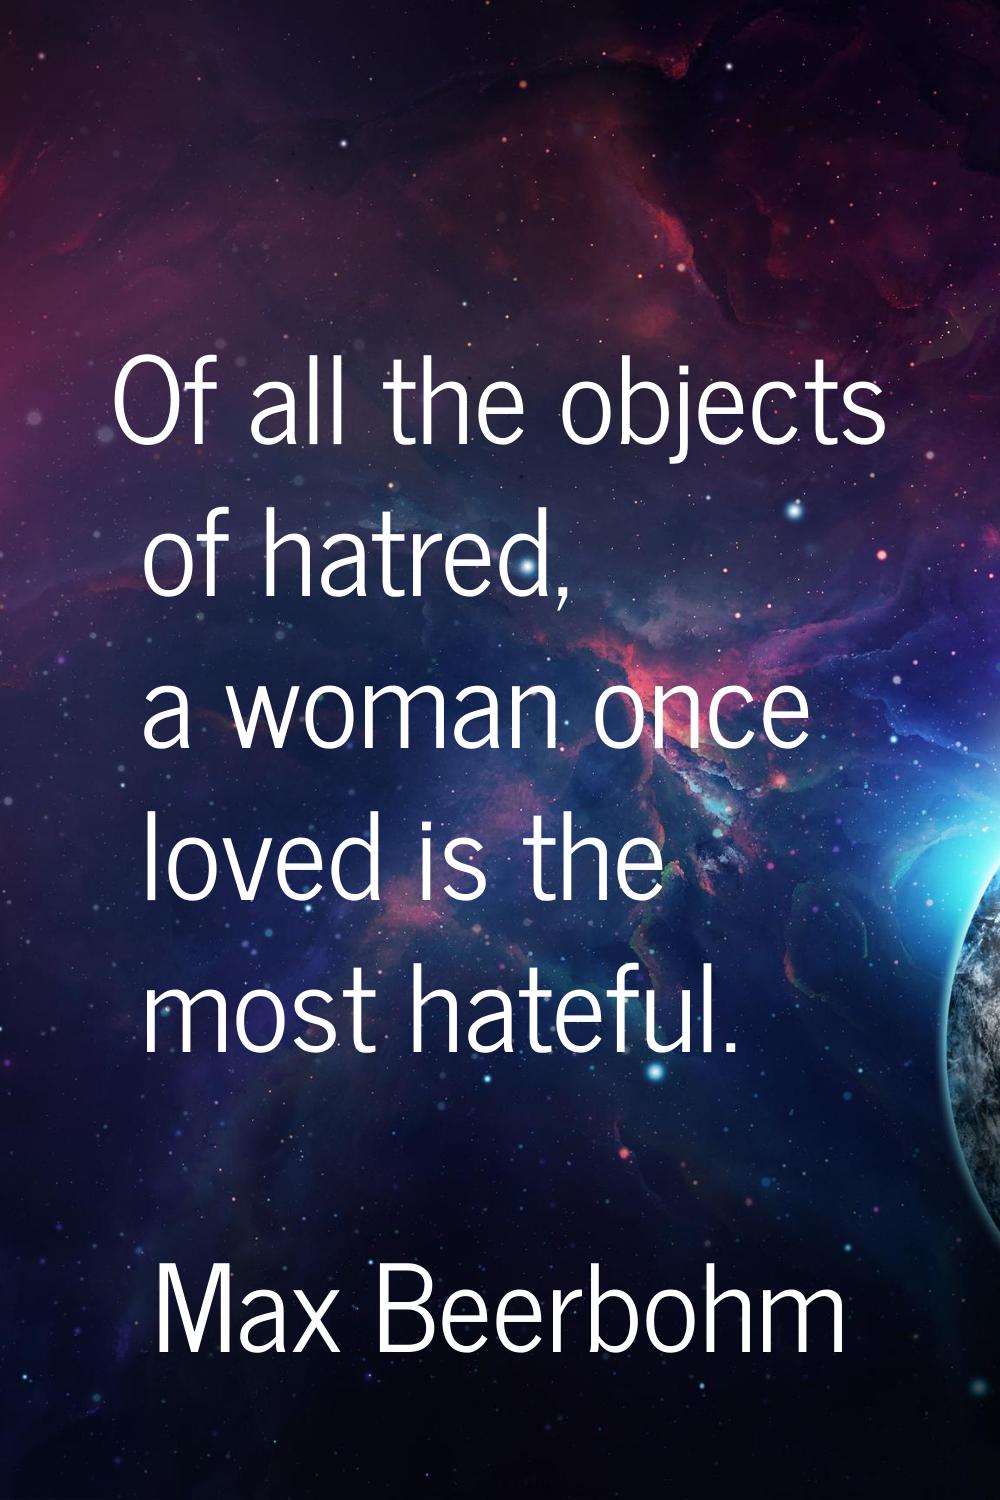 Of all the objects of hatred, a woman once loved is the most hateful.